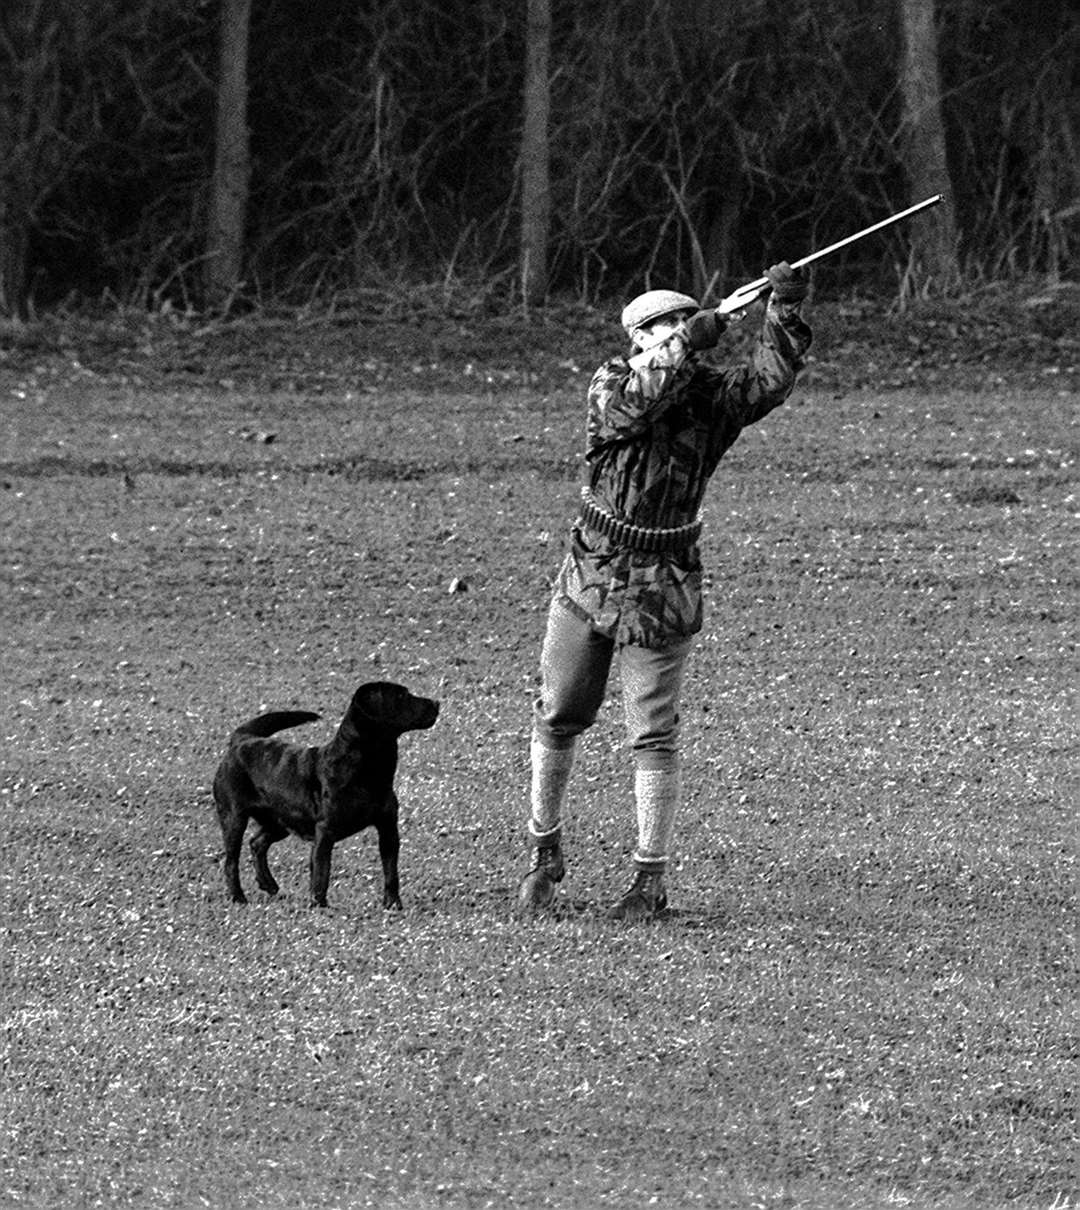 The Earl of Wessex shooting at Sandringham in 1981 (PA)